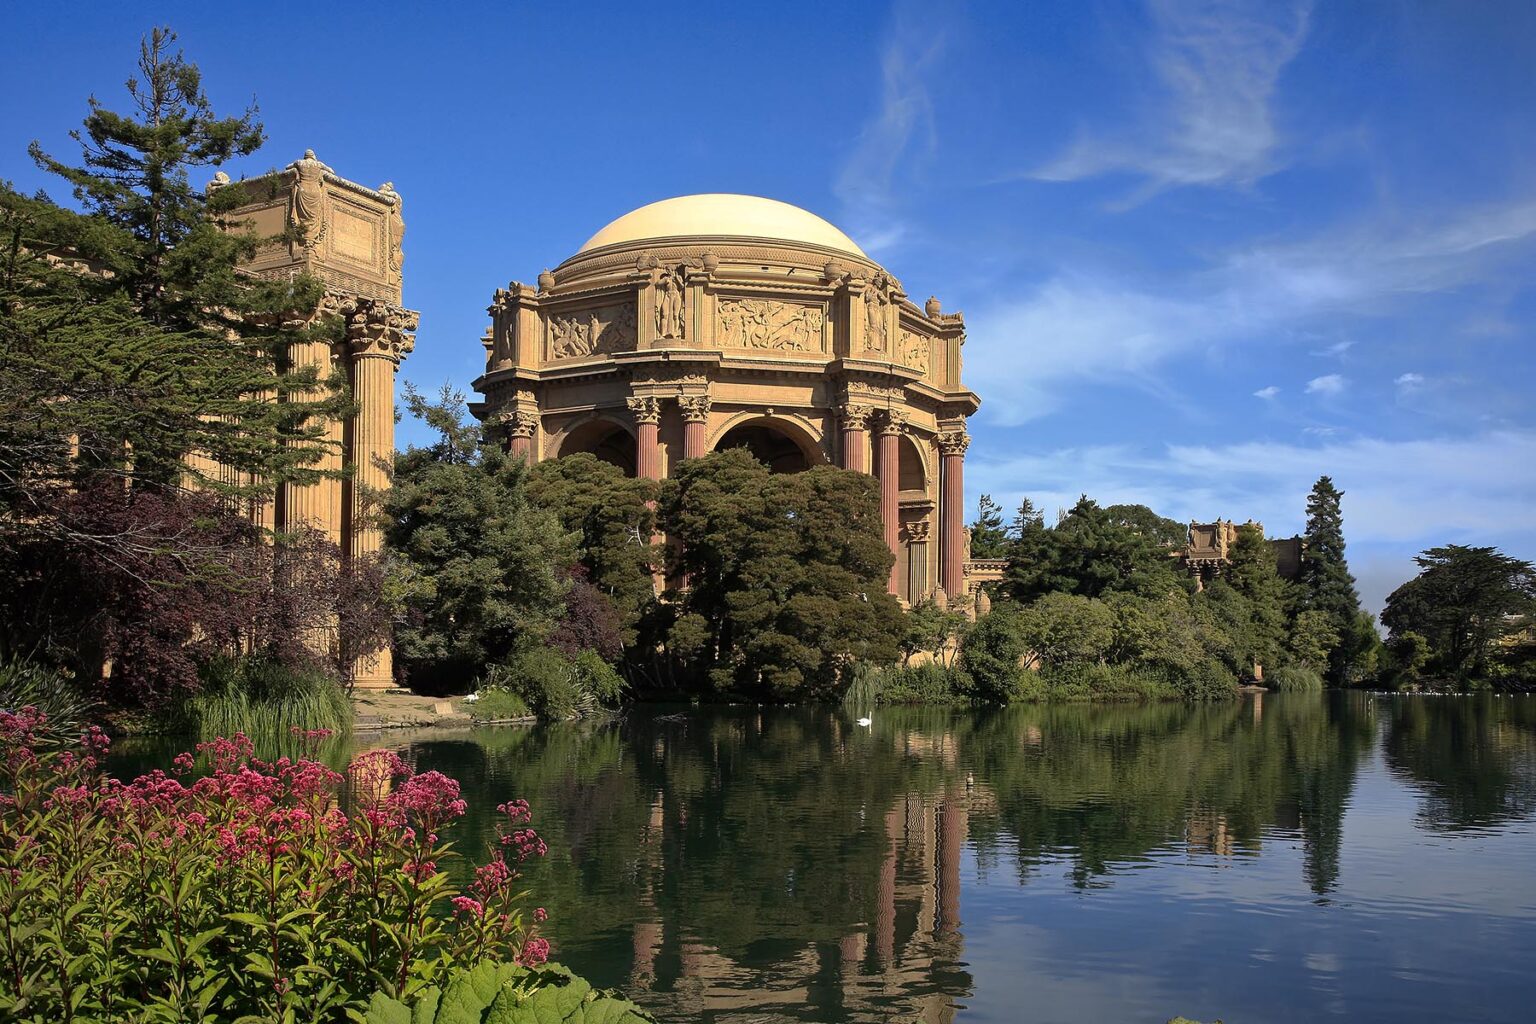 Pond and gardens at the Roman style PALACE OF FINE ARTS THEATRE - SAN FRANCISCO, CALIFORNIA